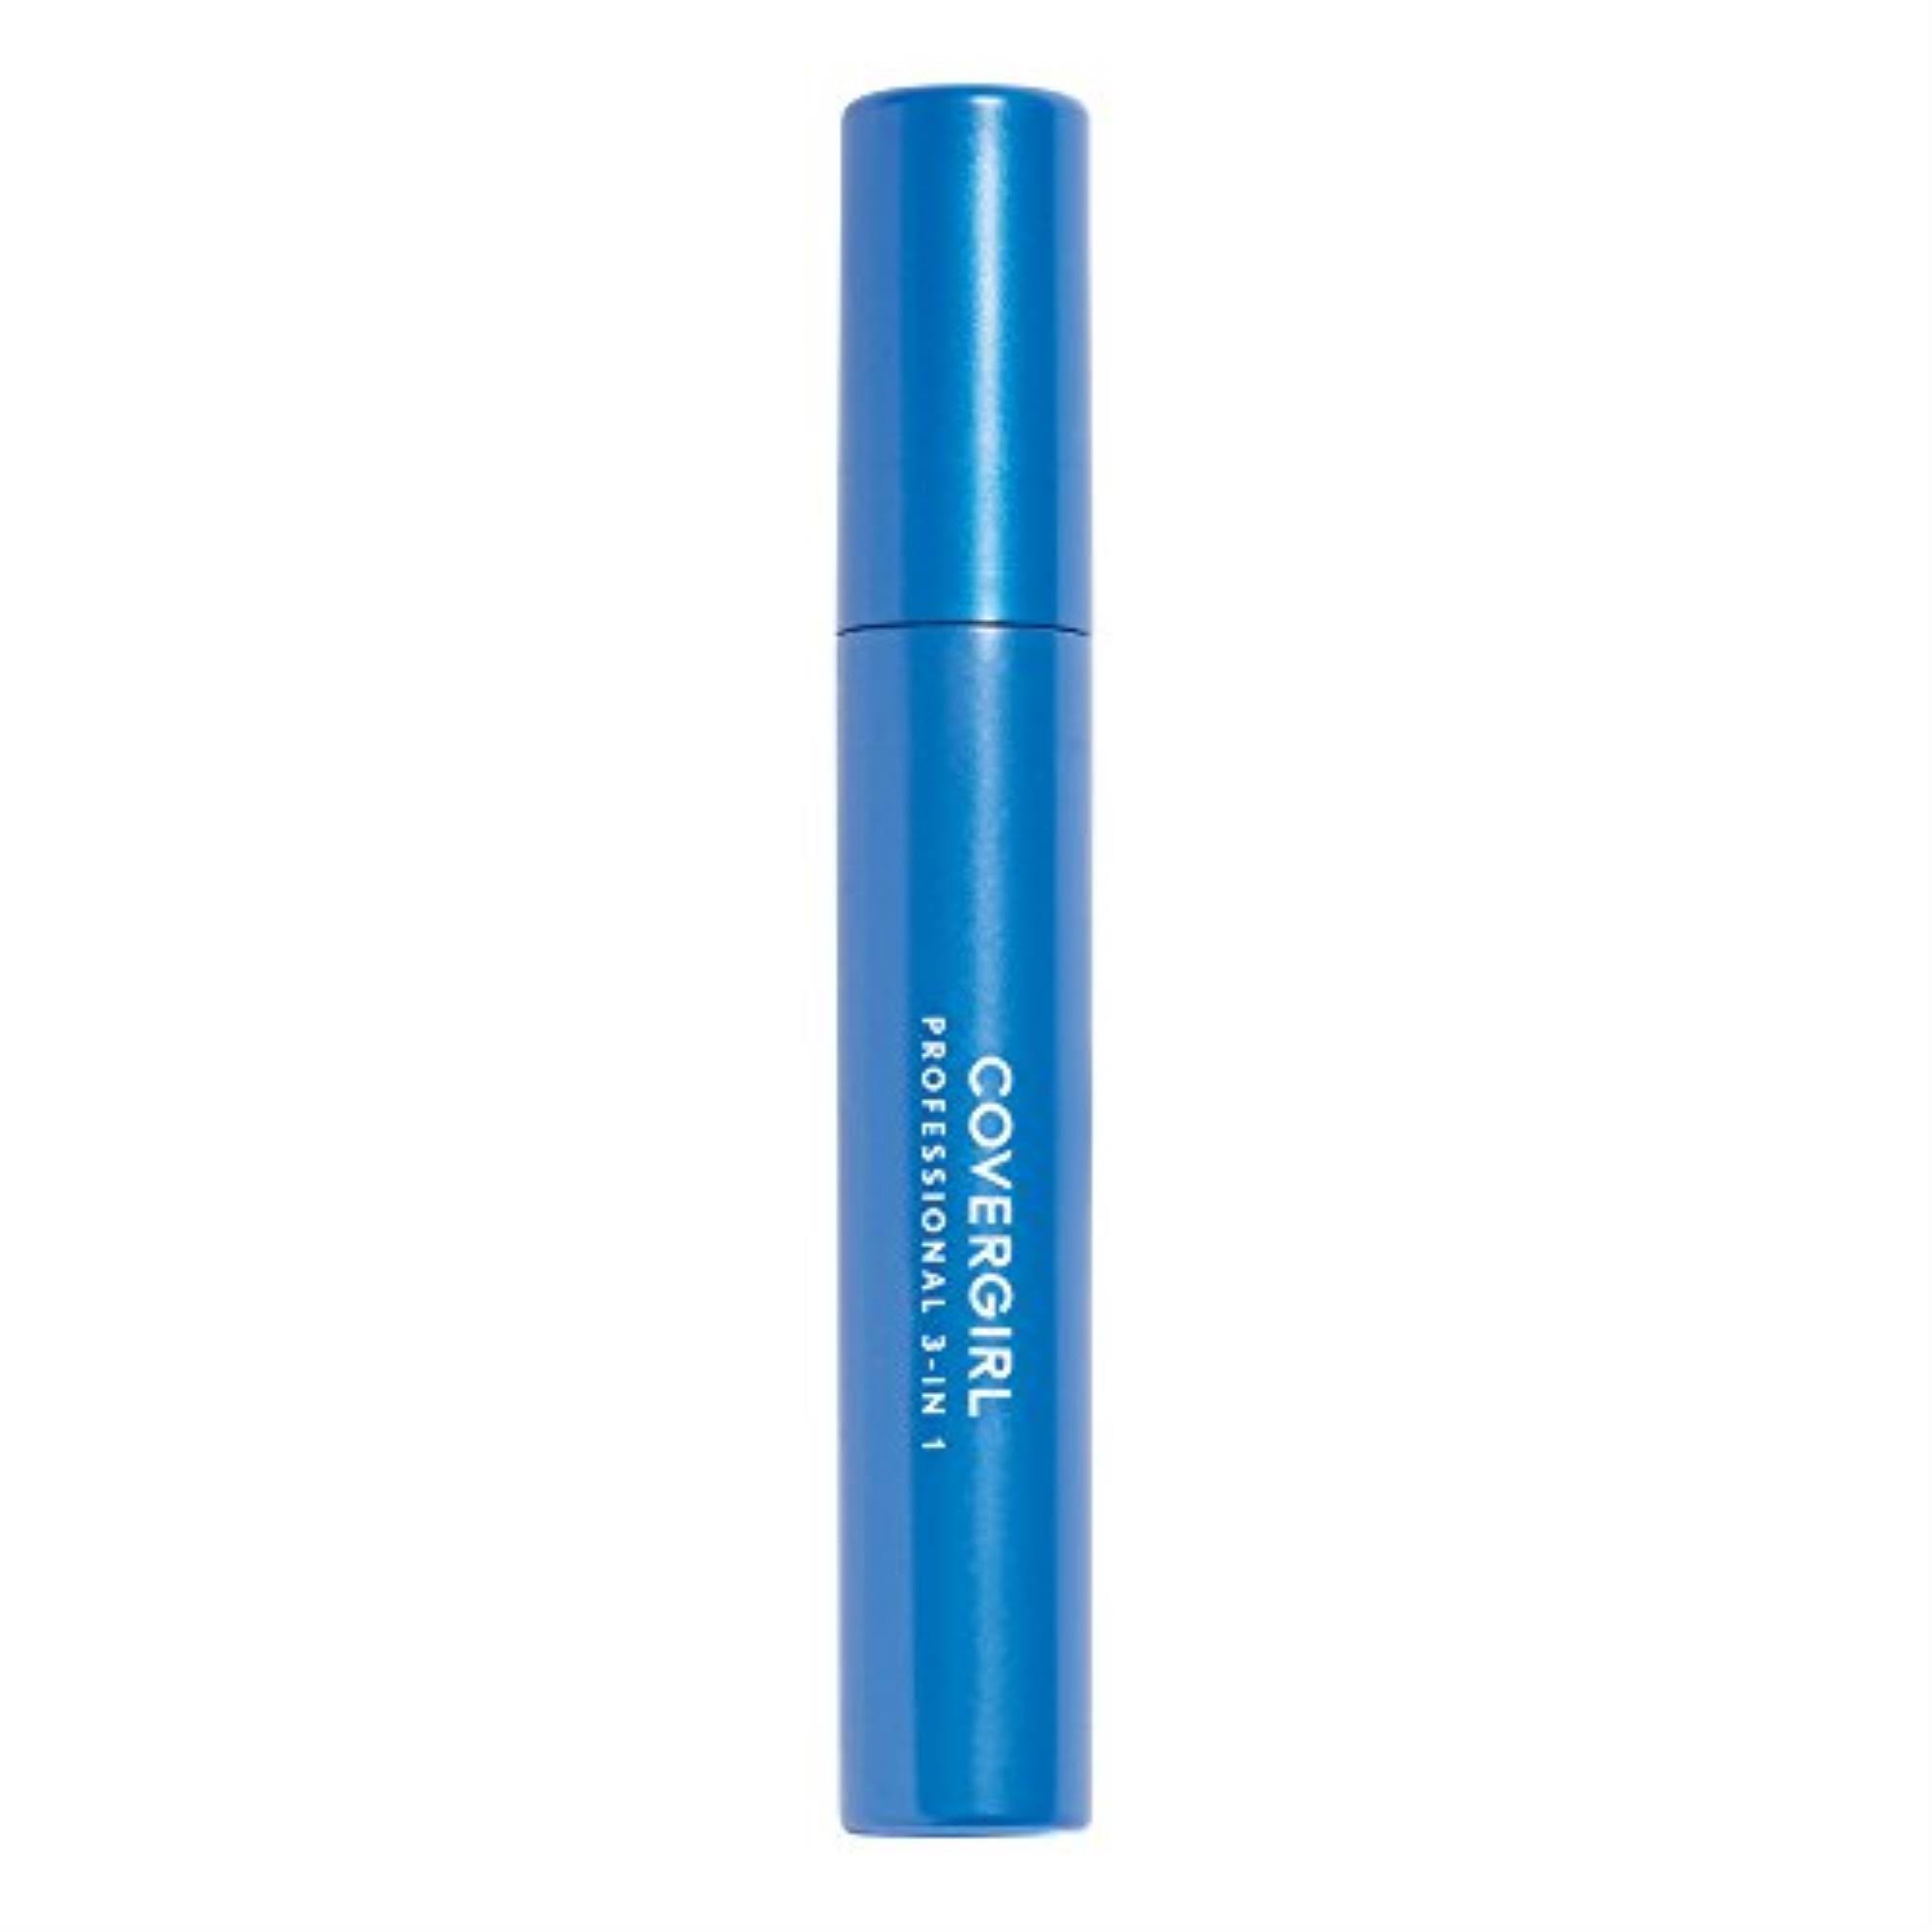 Covergirl Professional 3 in 1 Mascara - 200 Very Black